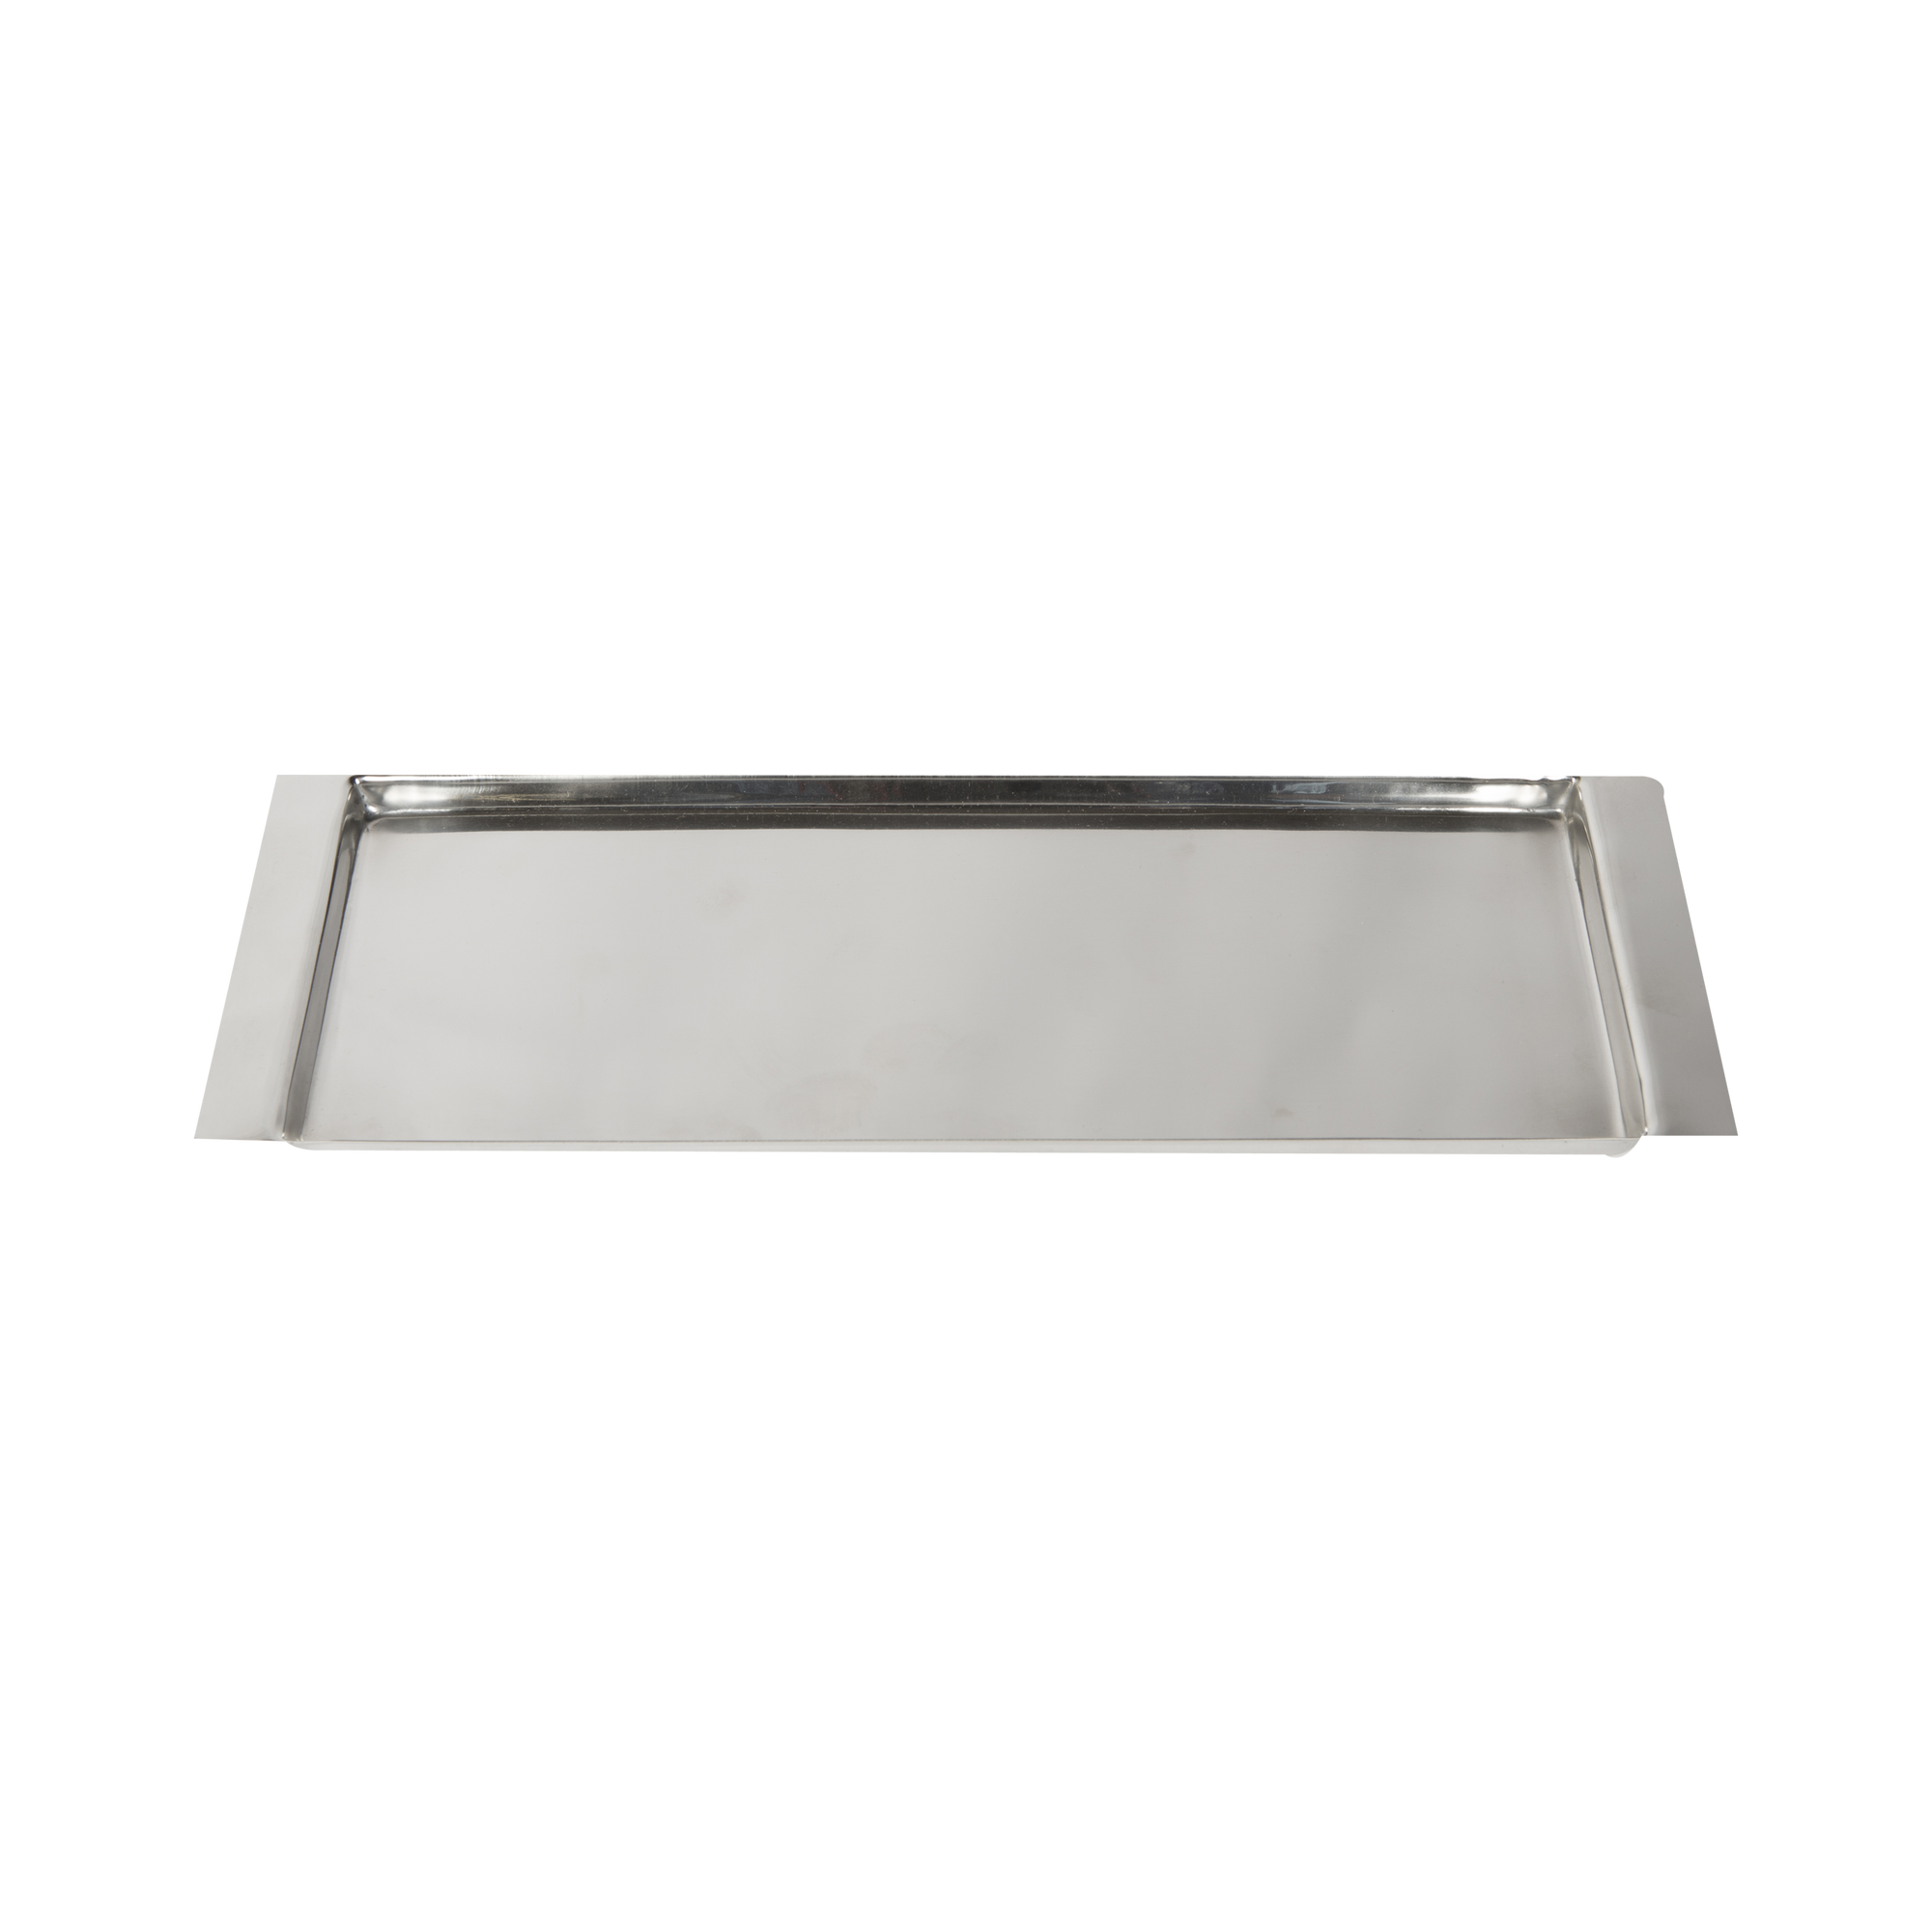 With a minimalist silhouette, the Cleo Collection in stainless steel looks sleek and stylish in modern bathrooms.